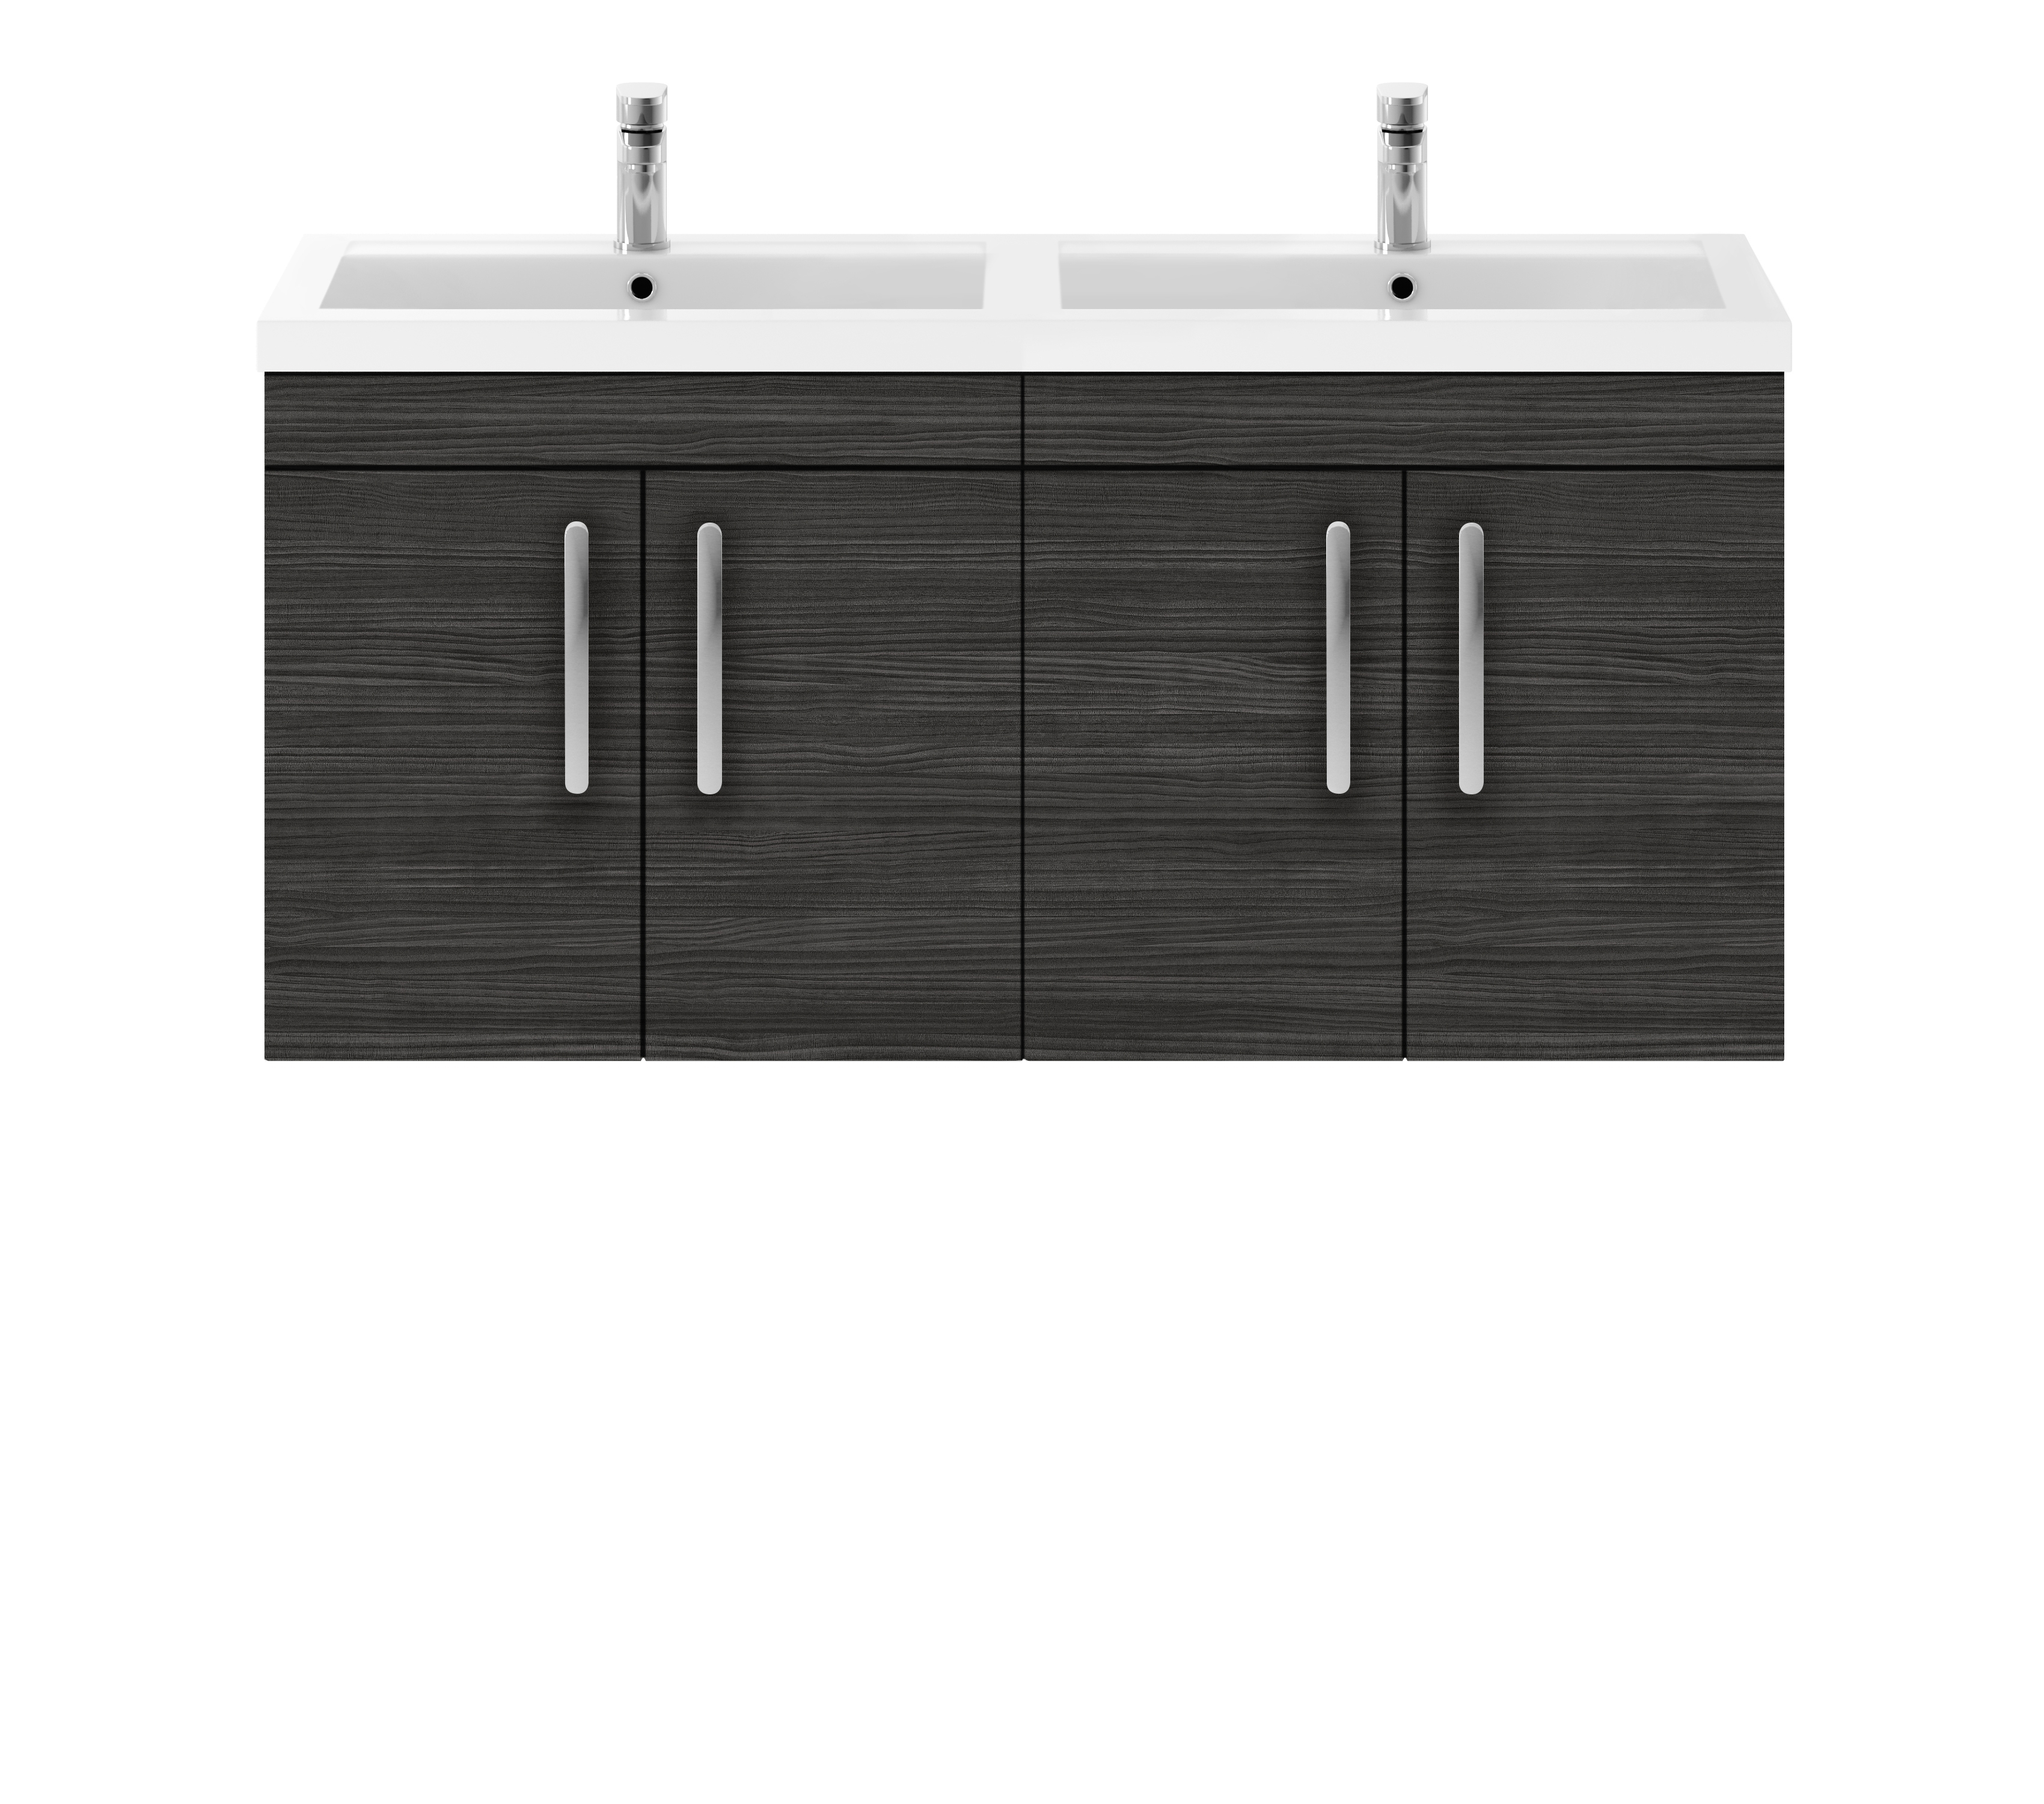 Nuie ATH033C Athena Modern Floor Standing Bathroom Double Vanity Sink Unit with Soft Close Drawers and Twin Basin Hacienda Black 1200mm 